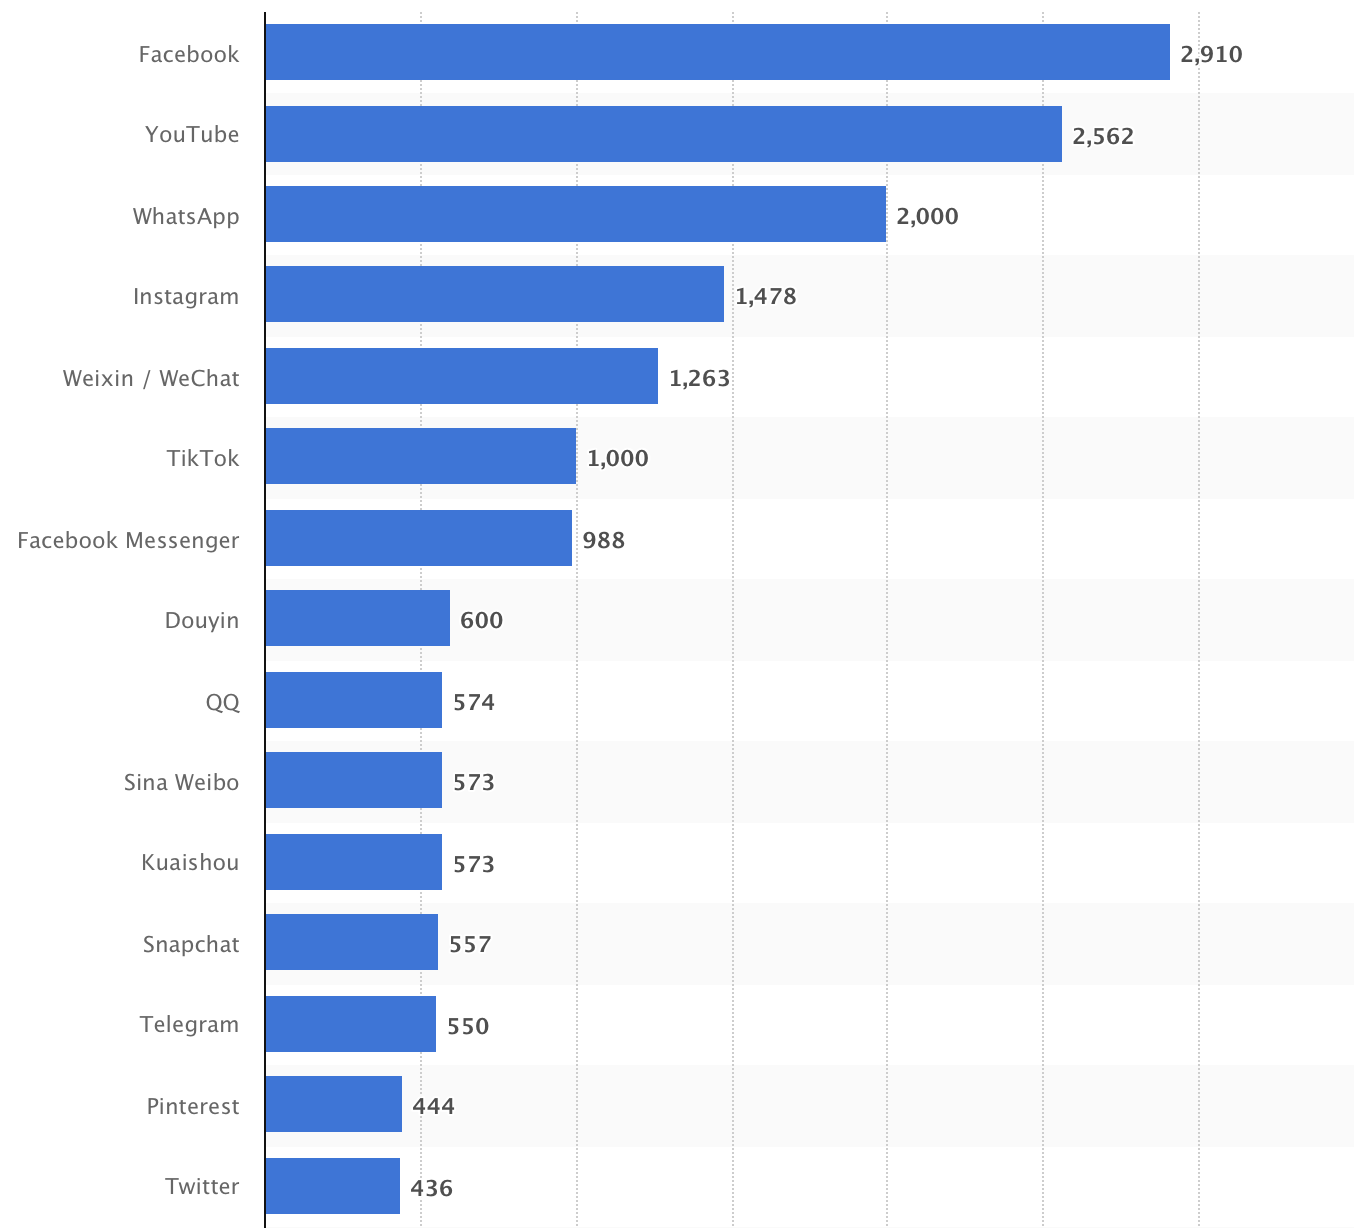 Number of active users, in millions. Source: Statista.